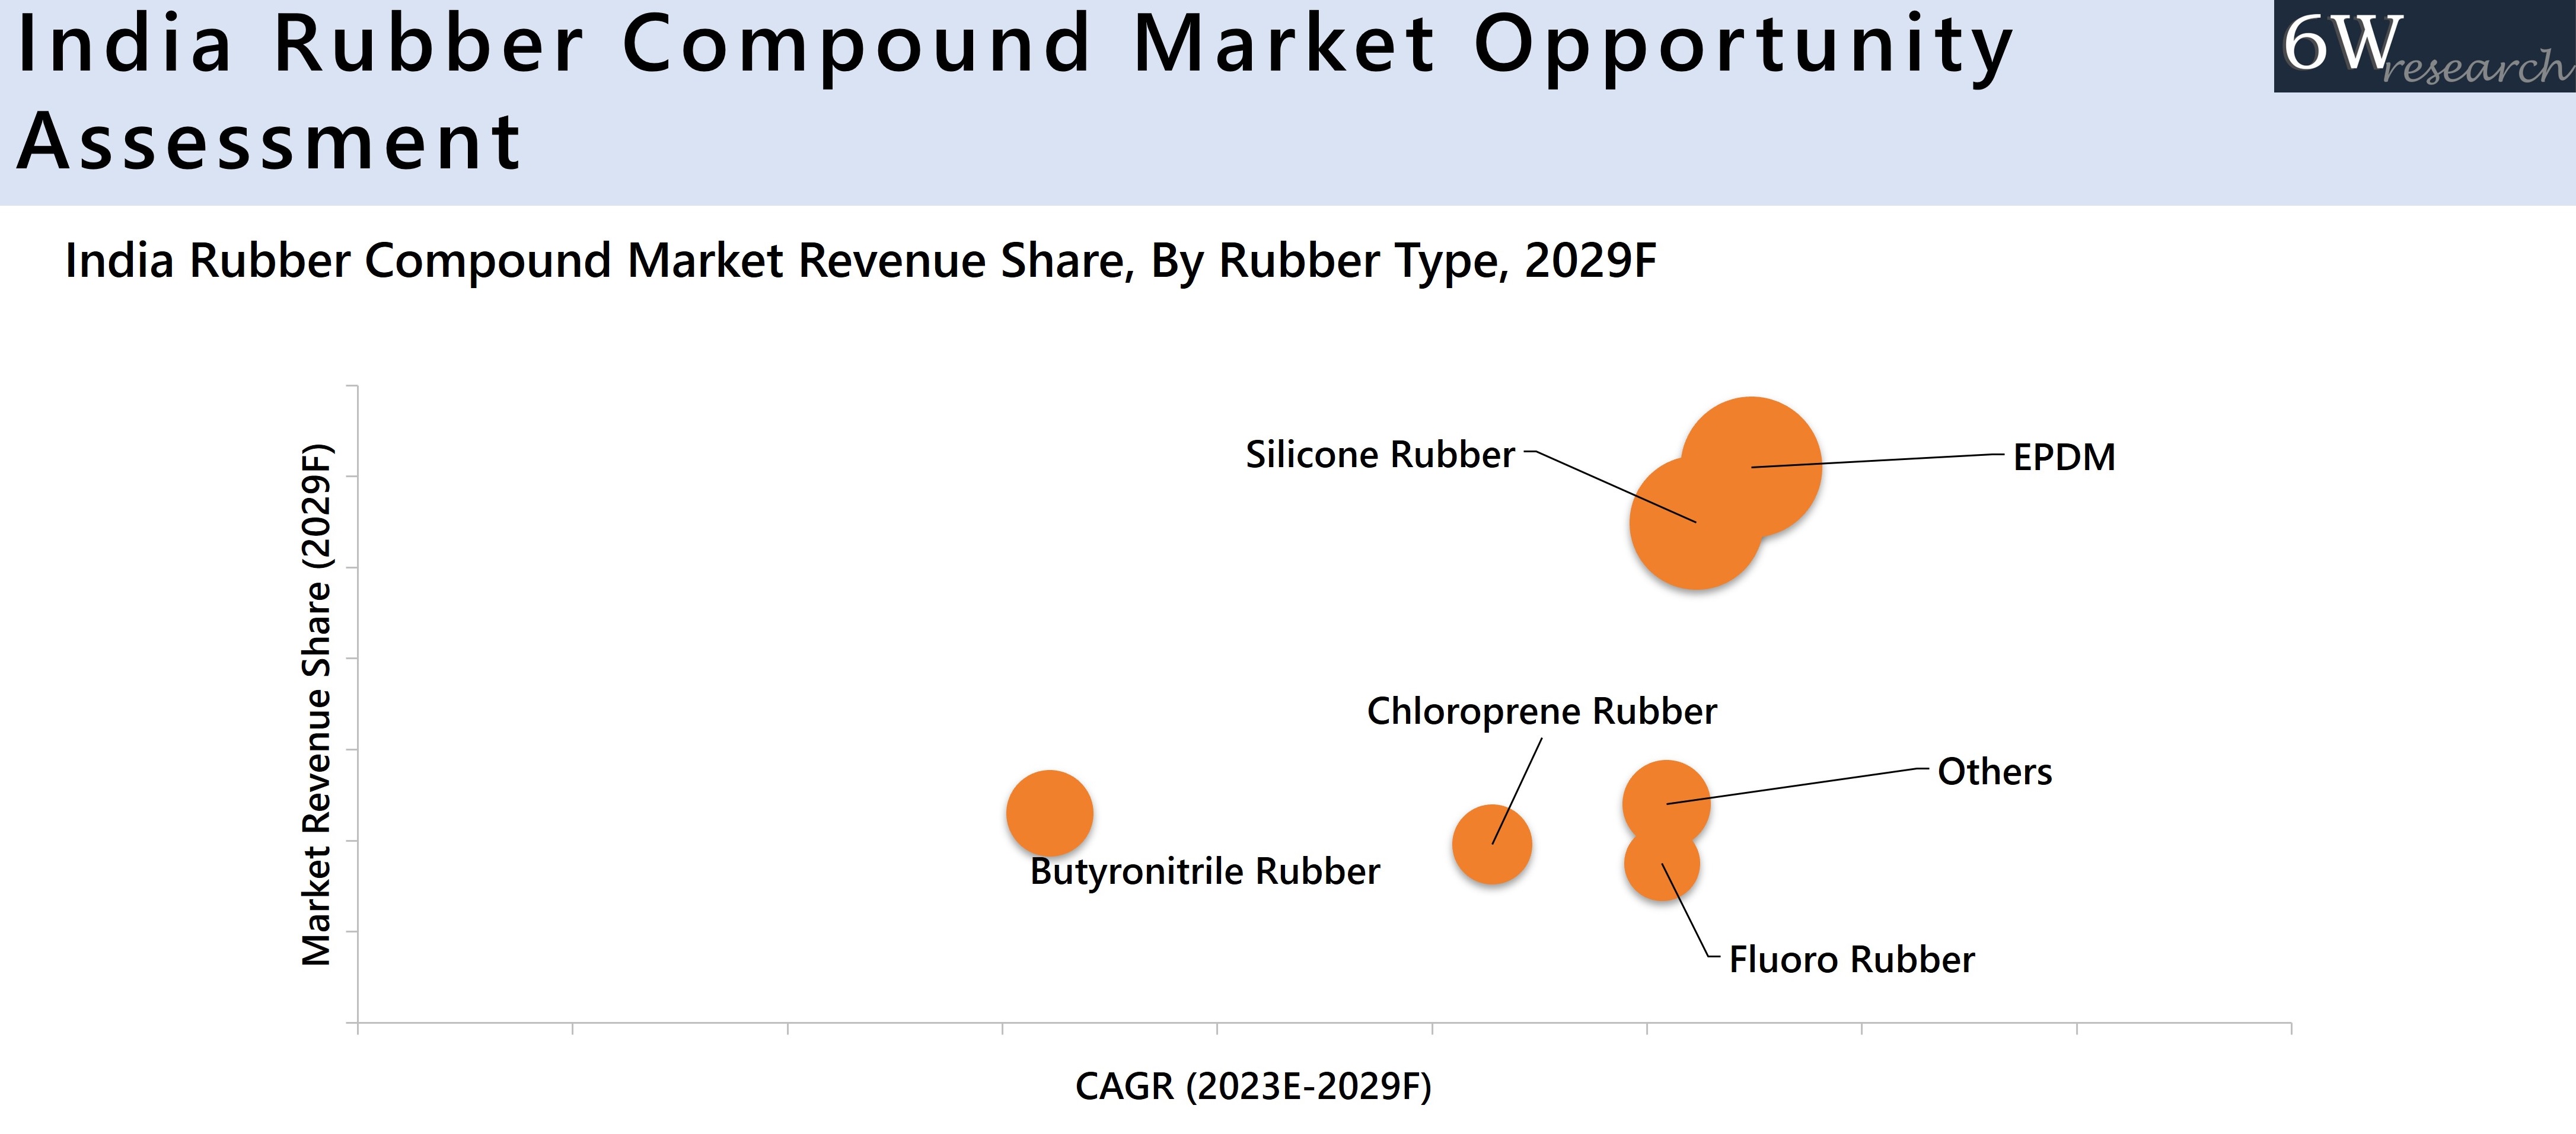 India Rubber Compound Market Opportunity Assessment